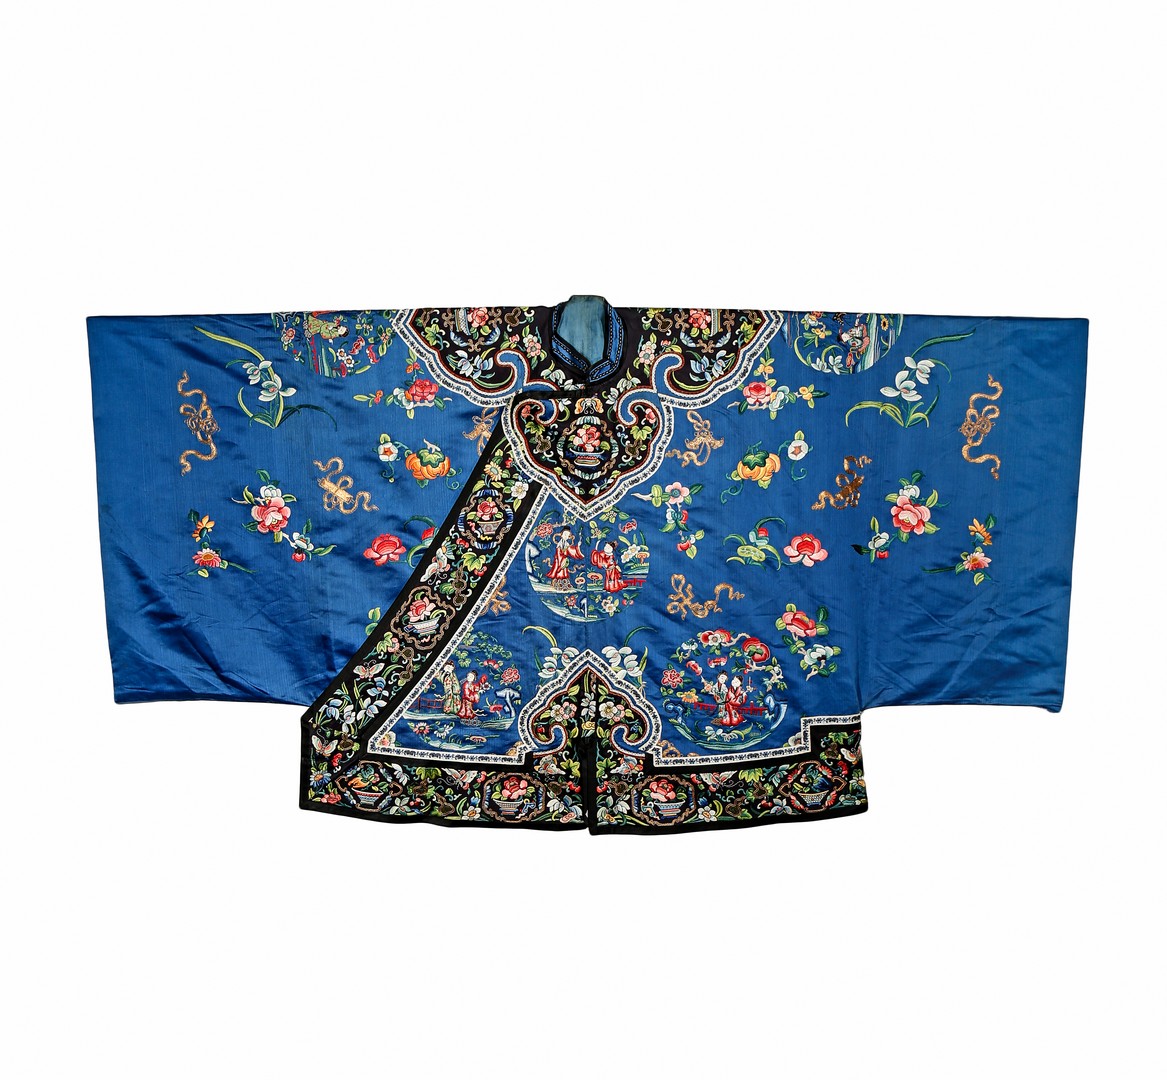 A CHINESE BLUE SILK JACKET, LATE QING DYNASTY Decorated with figural roundels and flowers,